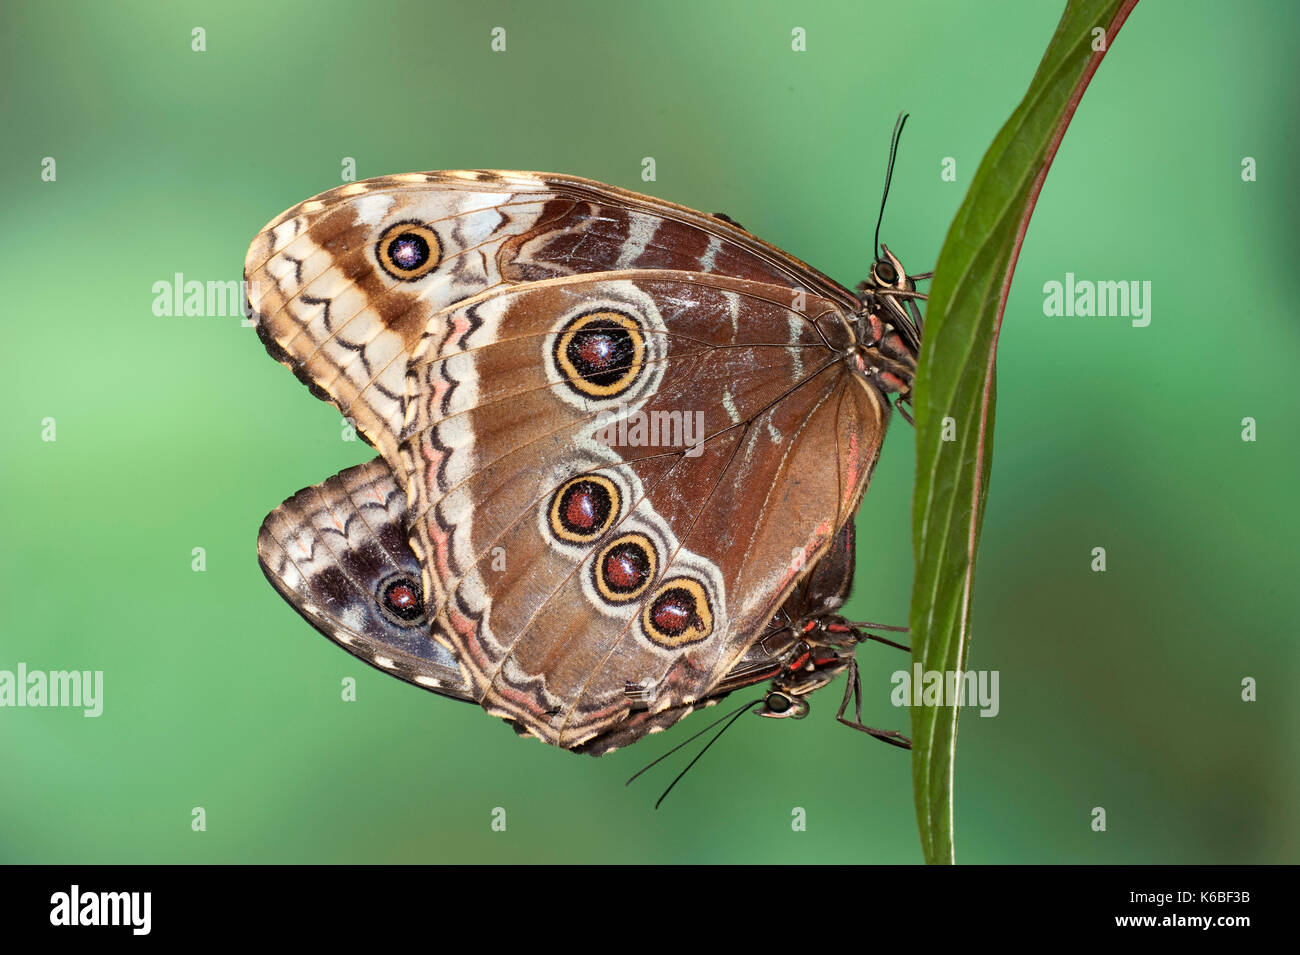 Blue Morpho Butterflies, Mating, Morpho peleides, Central & South America, pair, together, underside of wings, eye spots, rainforest Stock Photo